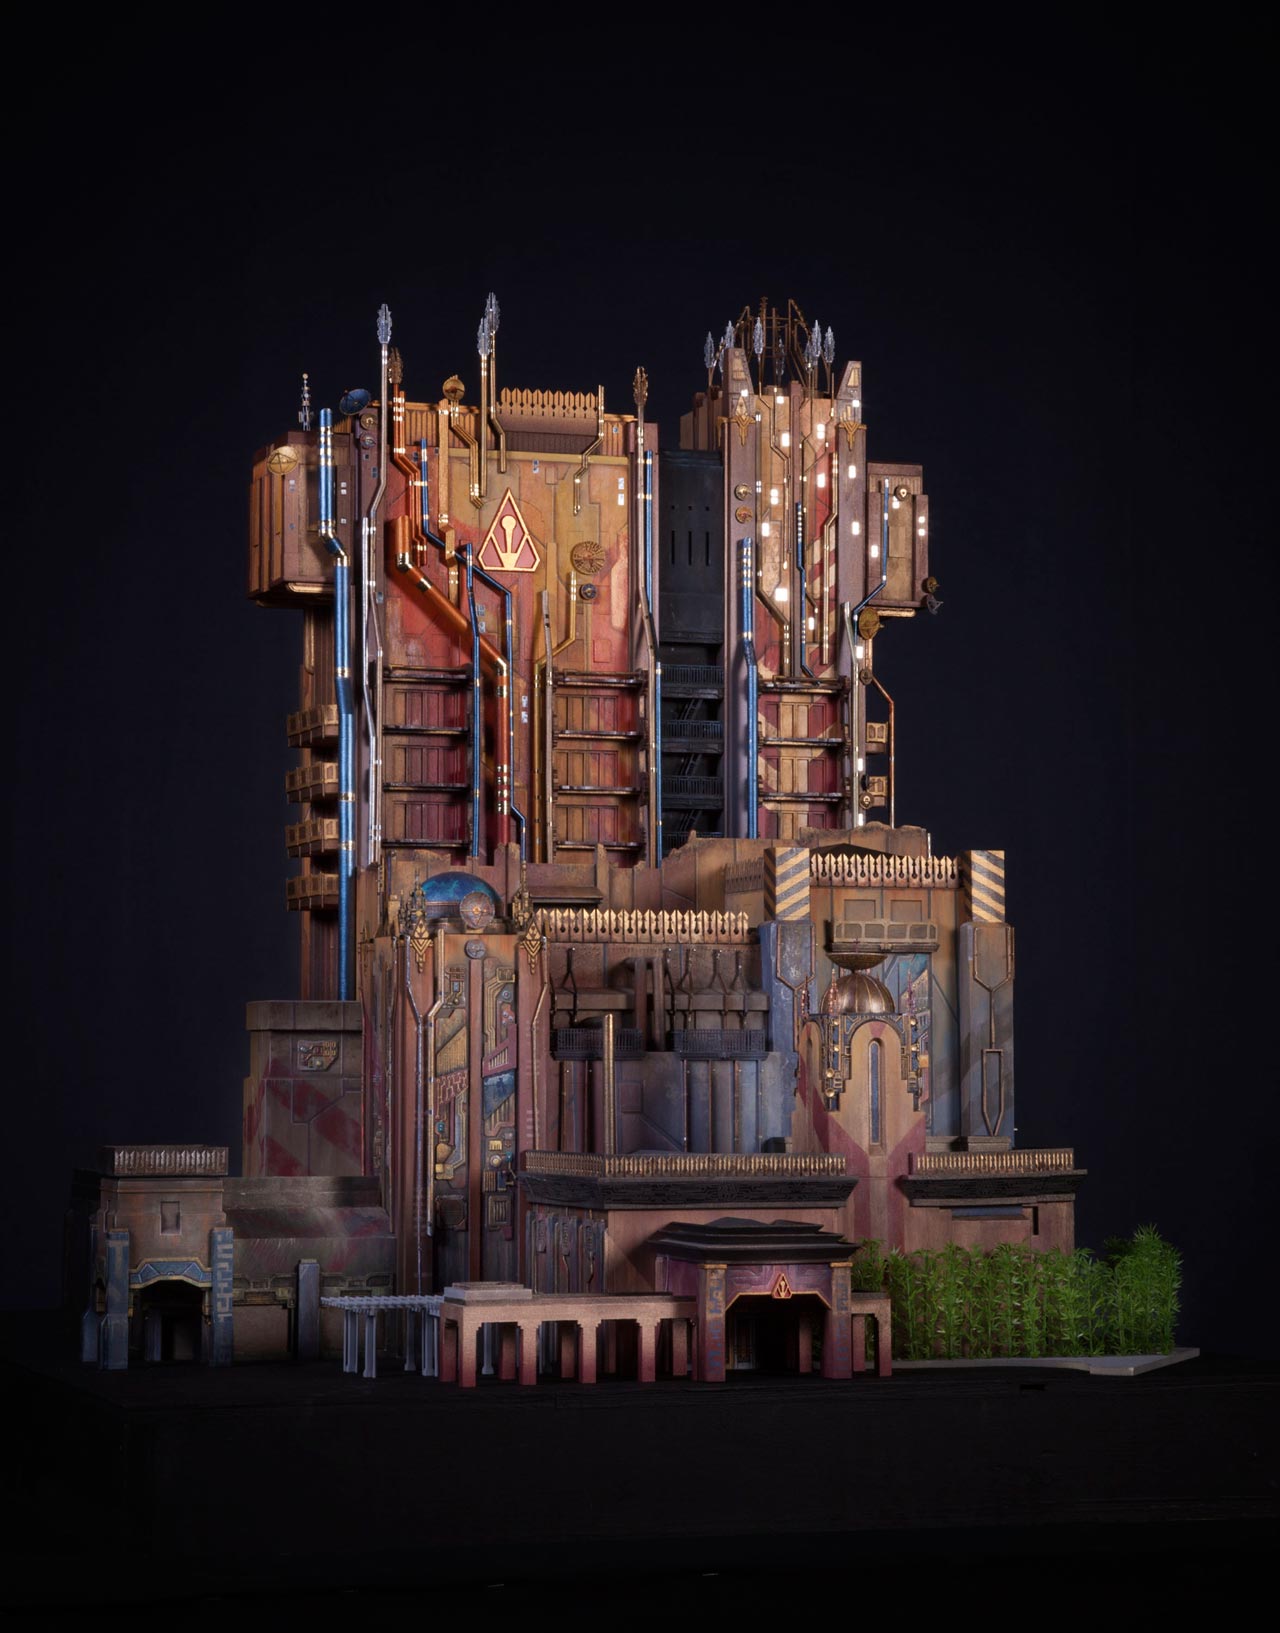 Guardians of the Galaxy Ð Mission: BREAKOUT! -- A scale model created by Walt Disney Imagineering shows the exterior of Guardians of the Galaxy Ð Mission: BREAKOUT!, a new attraction at Disney California Adventure park debuting in summer 2017. Guardians of the Galaxy Ð Mission: BREAKOUT! will take park guests through the fortress-like museum of the mysterious Collector, who is keeping his newest acquisitions, the Guardians of the Galaxy, as prisoners. Guests will board a gantry lift which launches them into a daring adventure as they join Rocket Raccoon in an attempt to set free his fellow Guardians. The new attraction will transform the structure currently housing The Twilight Zone Tower of Terrorª into an epic new adventure, enhancing the breathtaking free fall sensation with new visual and audio effects to create a variety of ride experiences. Guests will experience multiple, random and unique ride profiles in which the rise and fall of the gantry lift rocks to the beat of music inspired by the filmÕs popular soundtrack. (Scott Brinegar/Disneyland Resort)